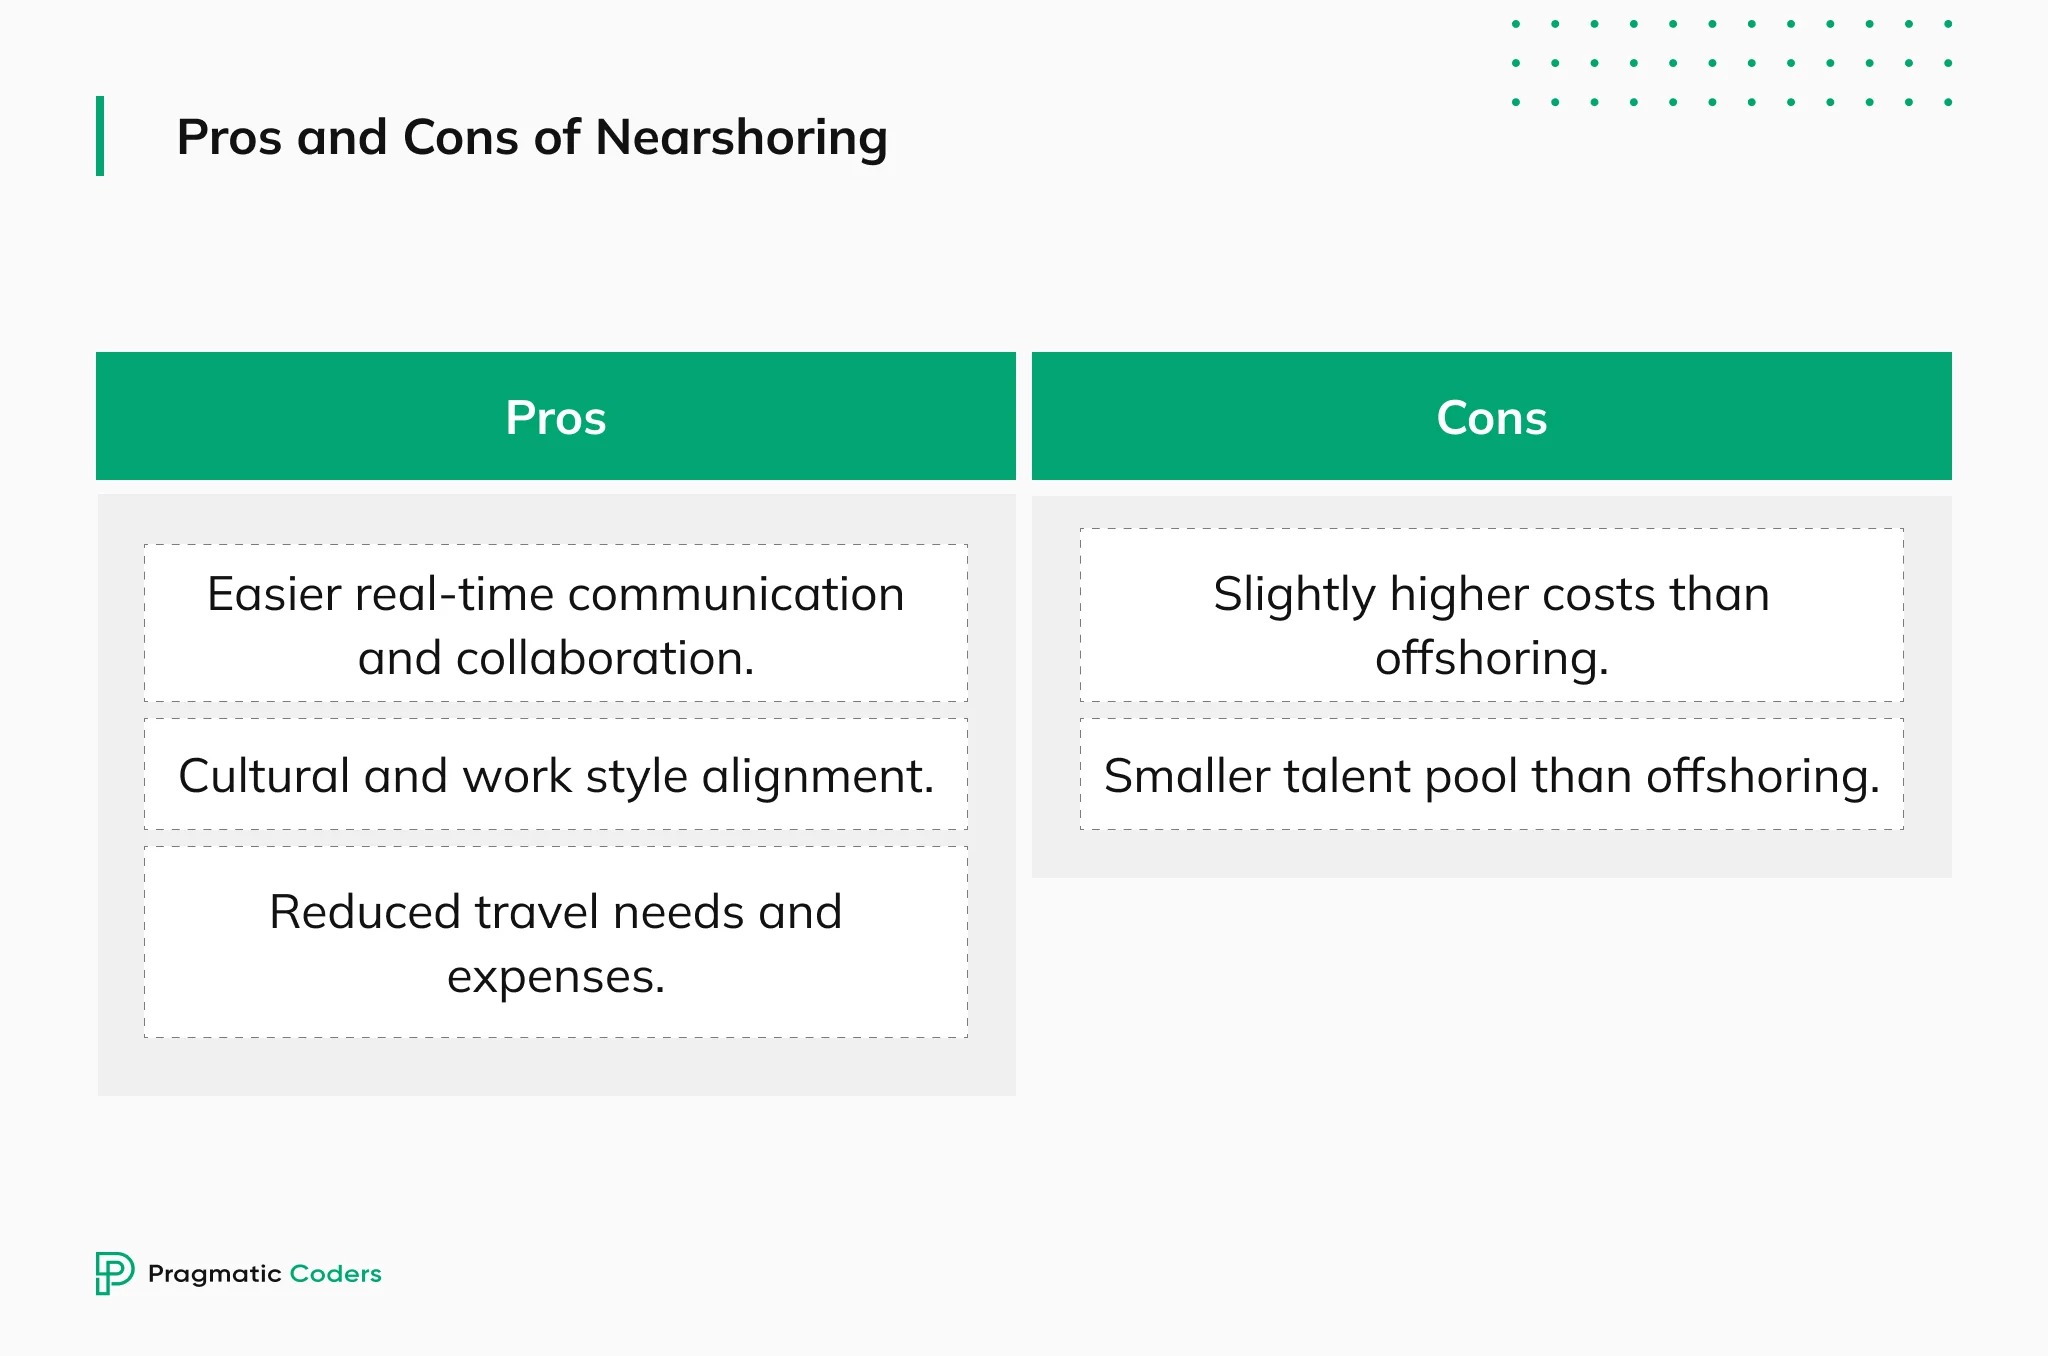 Pros and cons of nearshoring